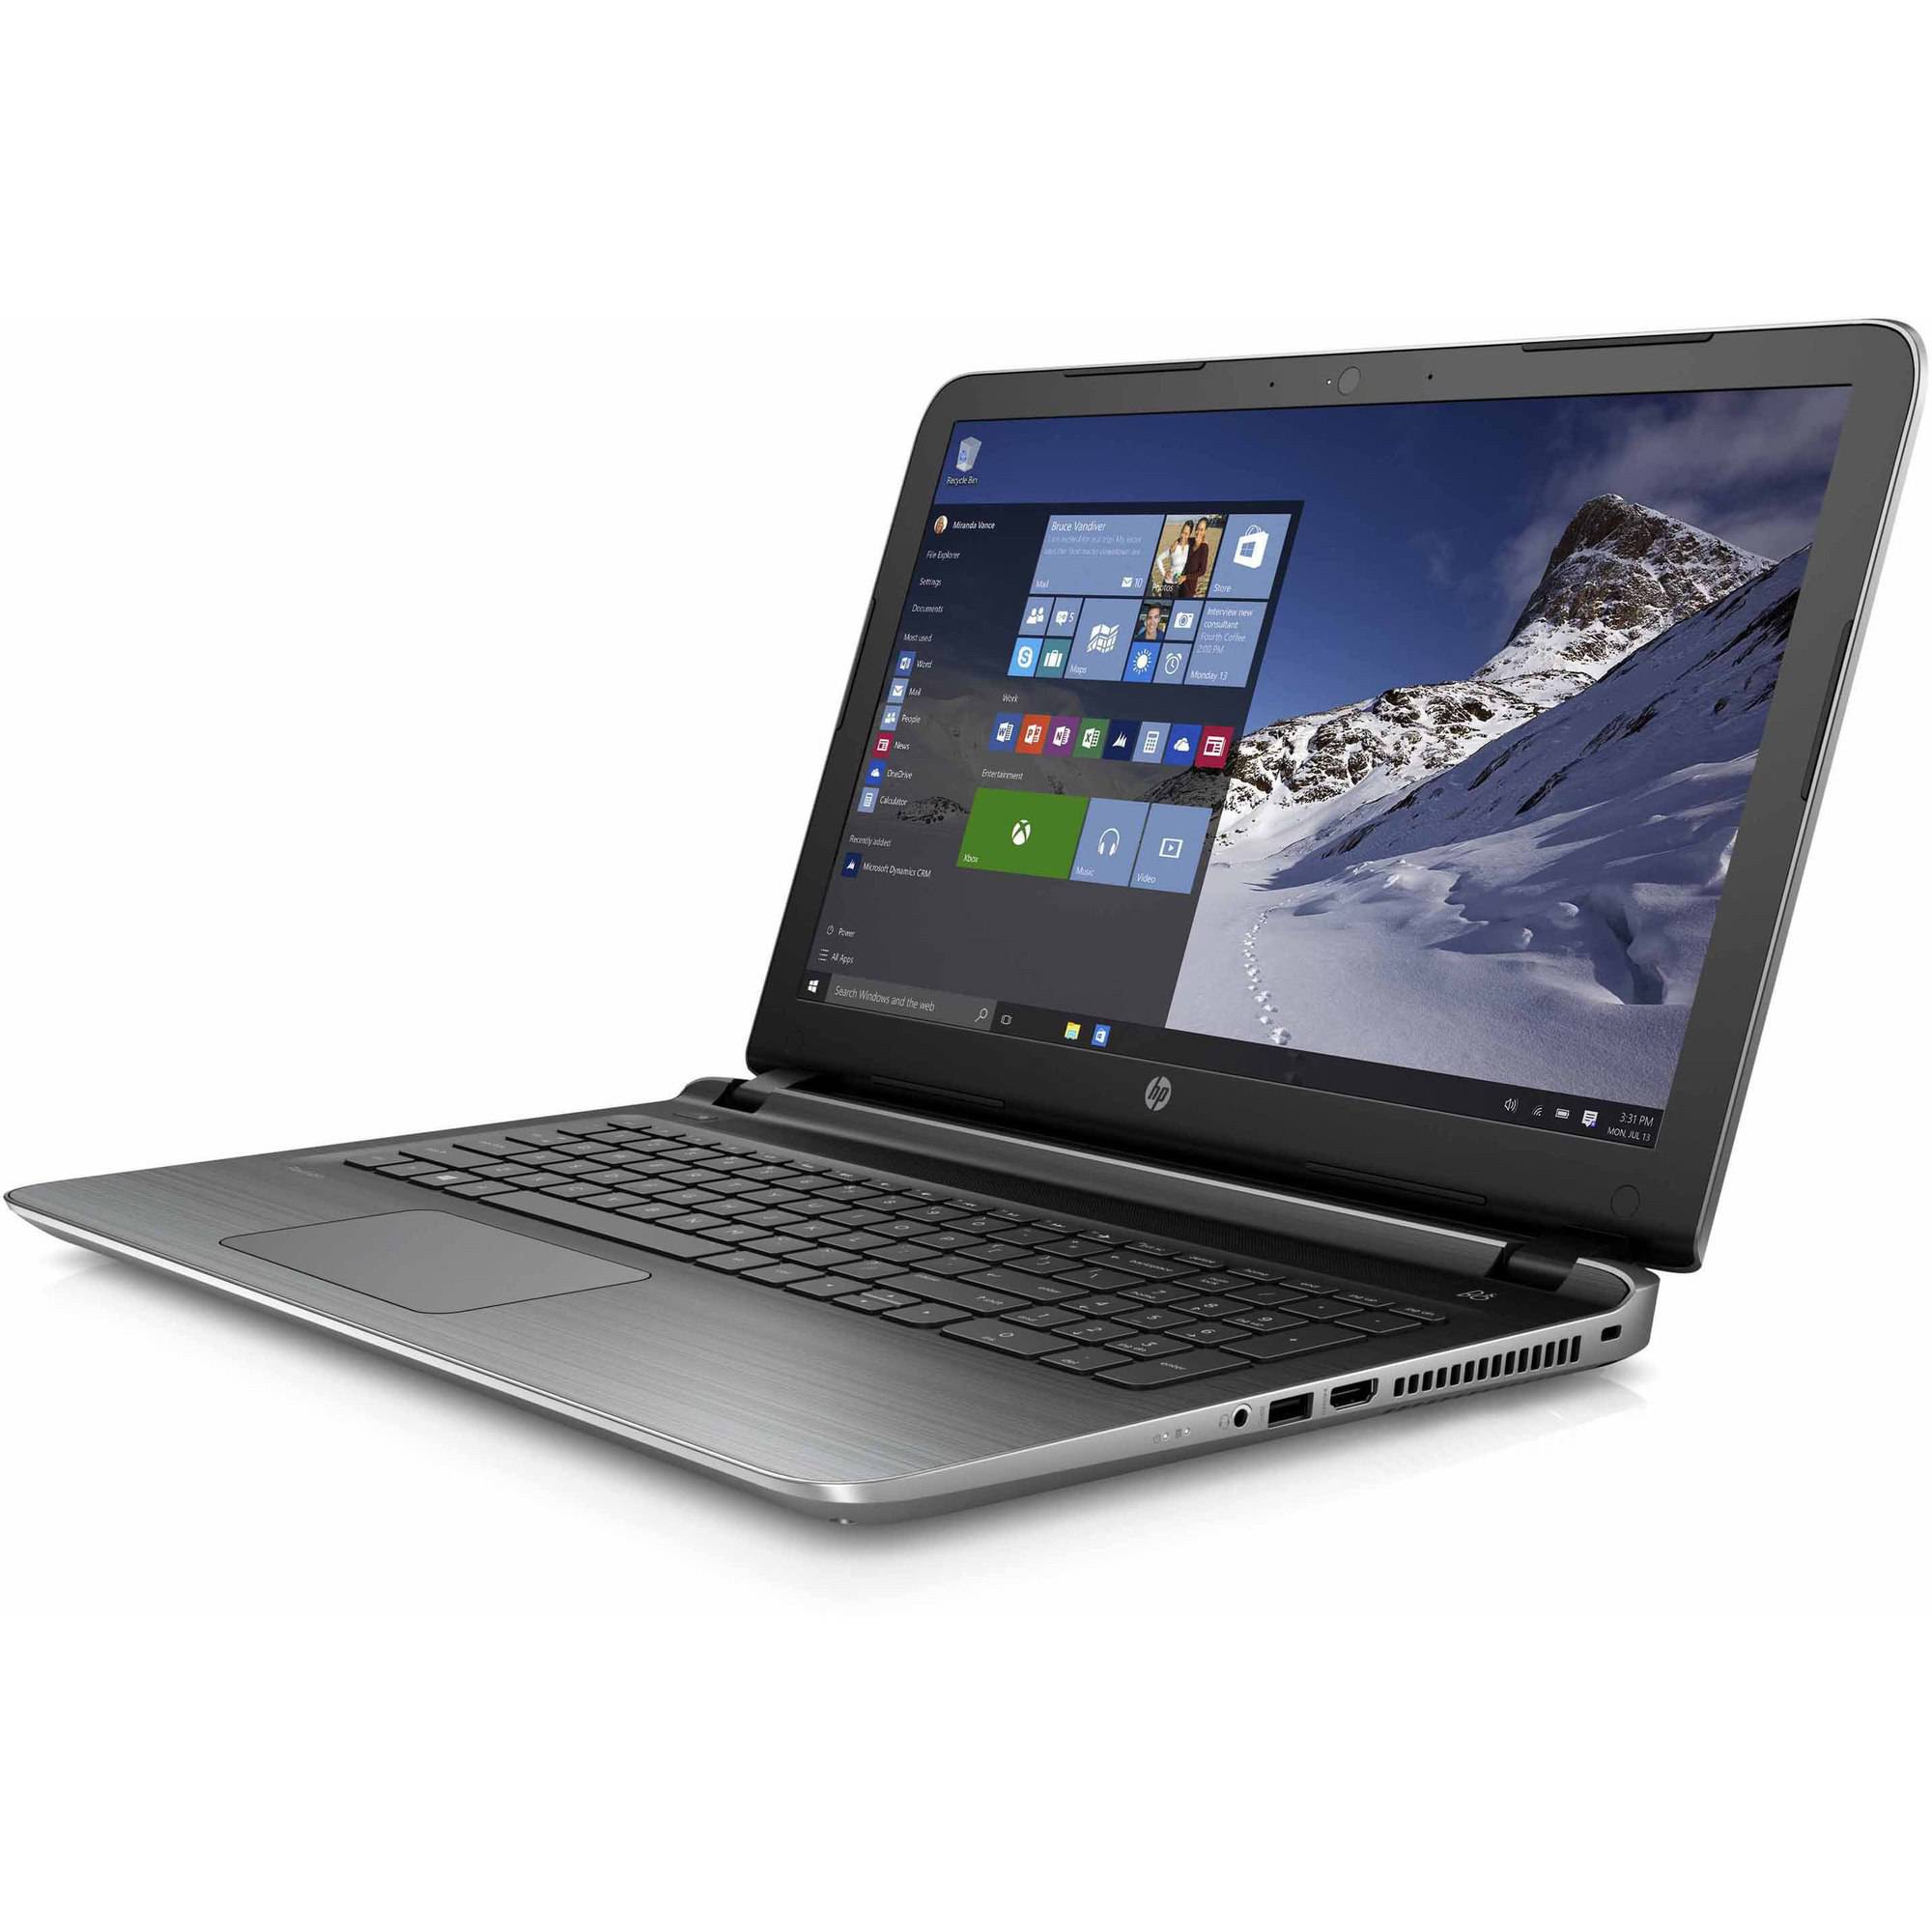 Restored HP Silver 17.3" Pavilion 17-g121wm Laptop PC with AMD A10-8700P Processor, 8GB Memory, 1TB Hard Drive and Windows 10 Home (Refurbished) - image 3 of 3